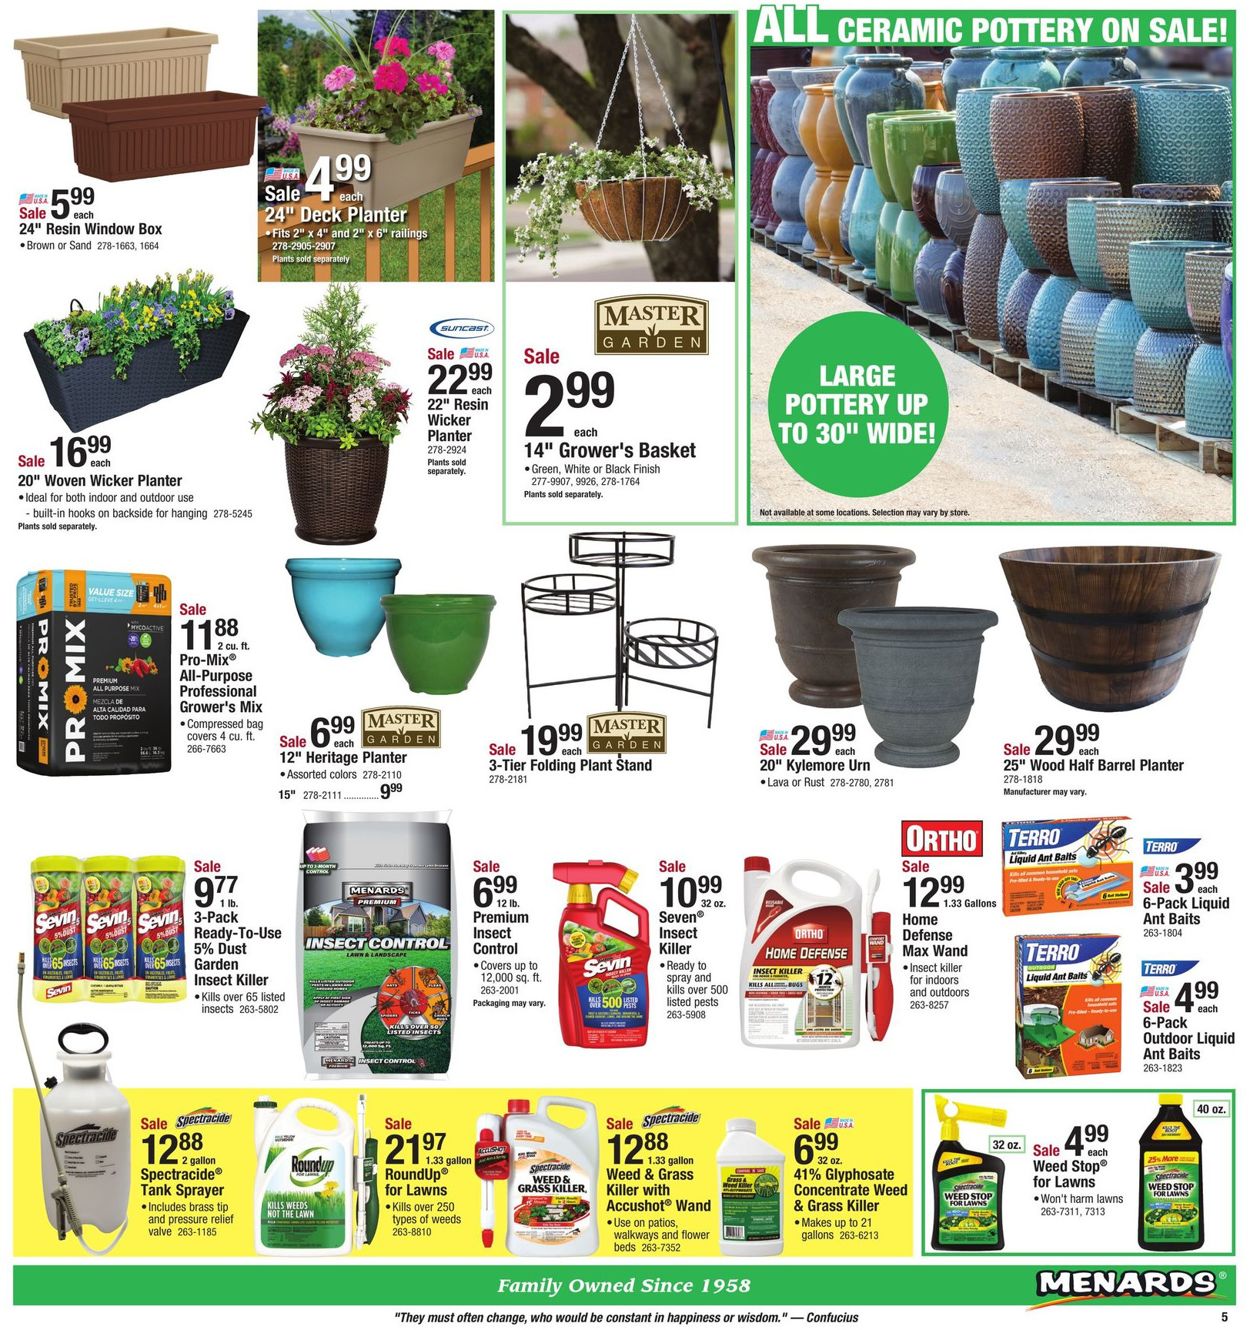 Menards Current weekly ad 04/28 - 05/05/2019 [7] - 0